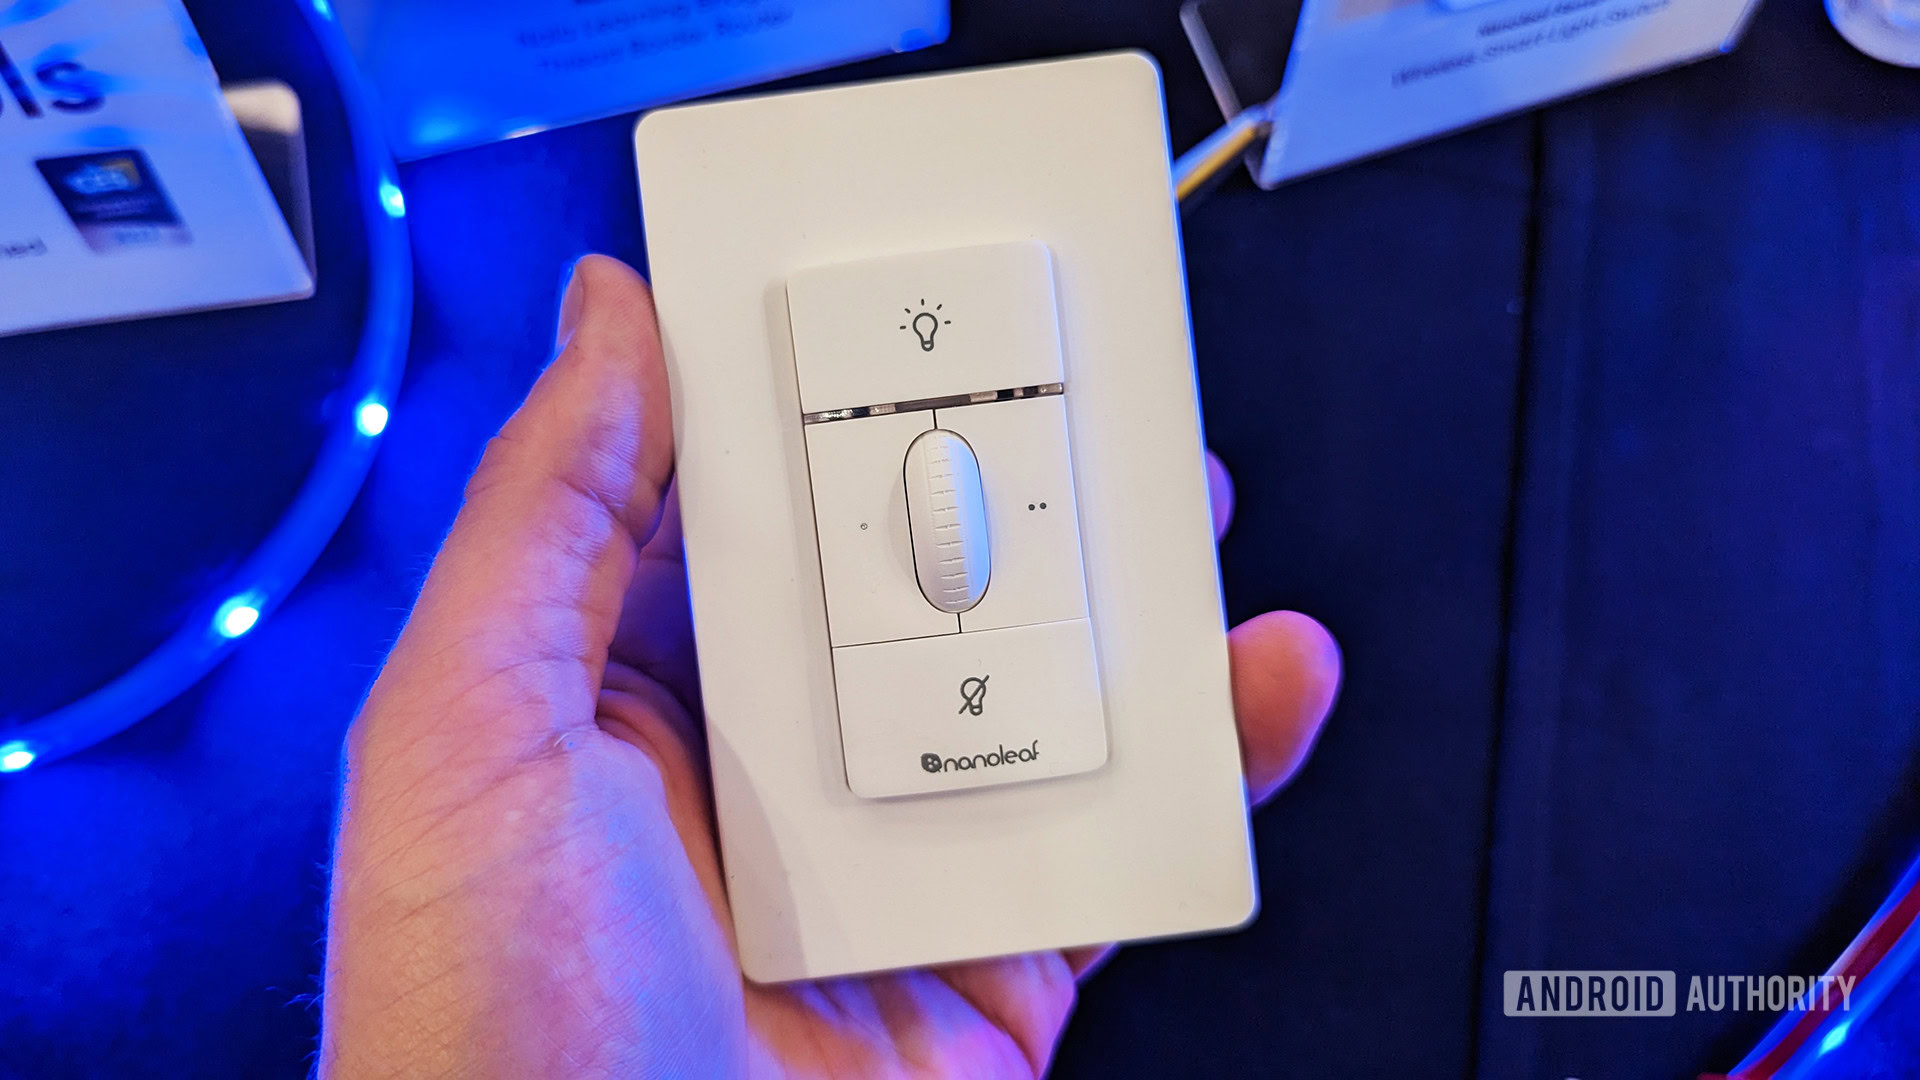 Sercomm unveils AI-powered smart home devices at CES 2023